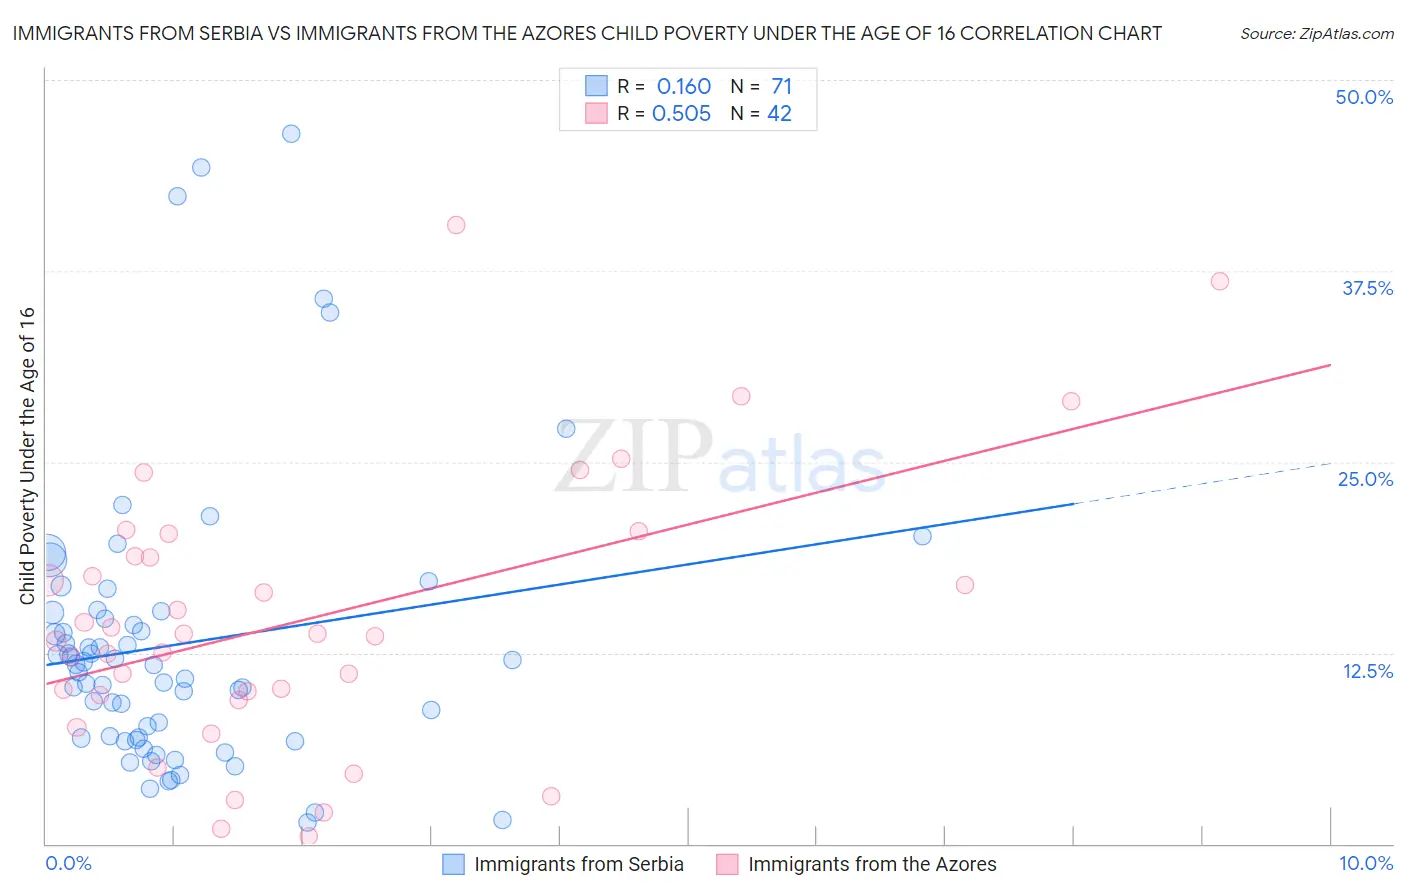 Immigrants from Serbia vs Immigrants from the Azores Child Poverty Under the Age of 16